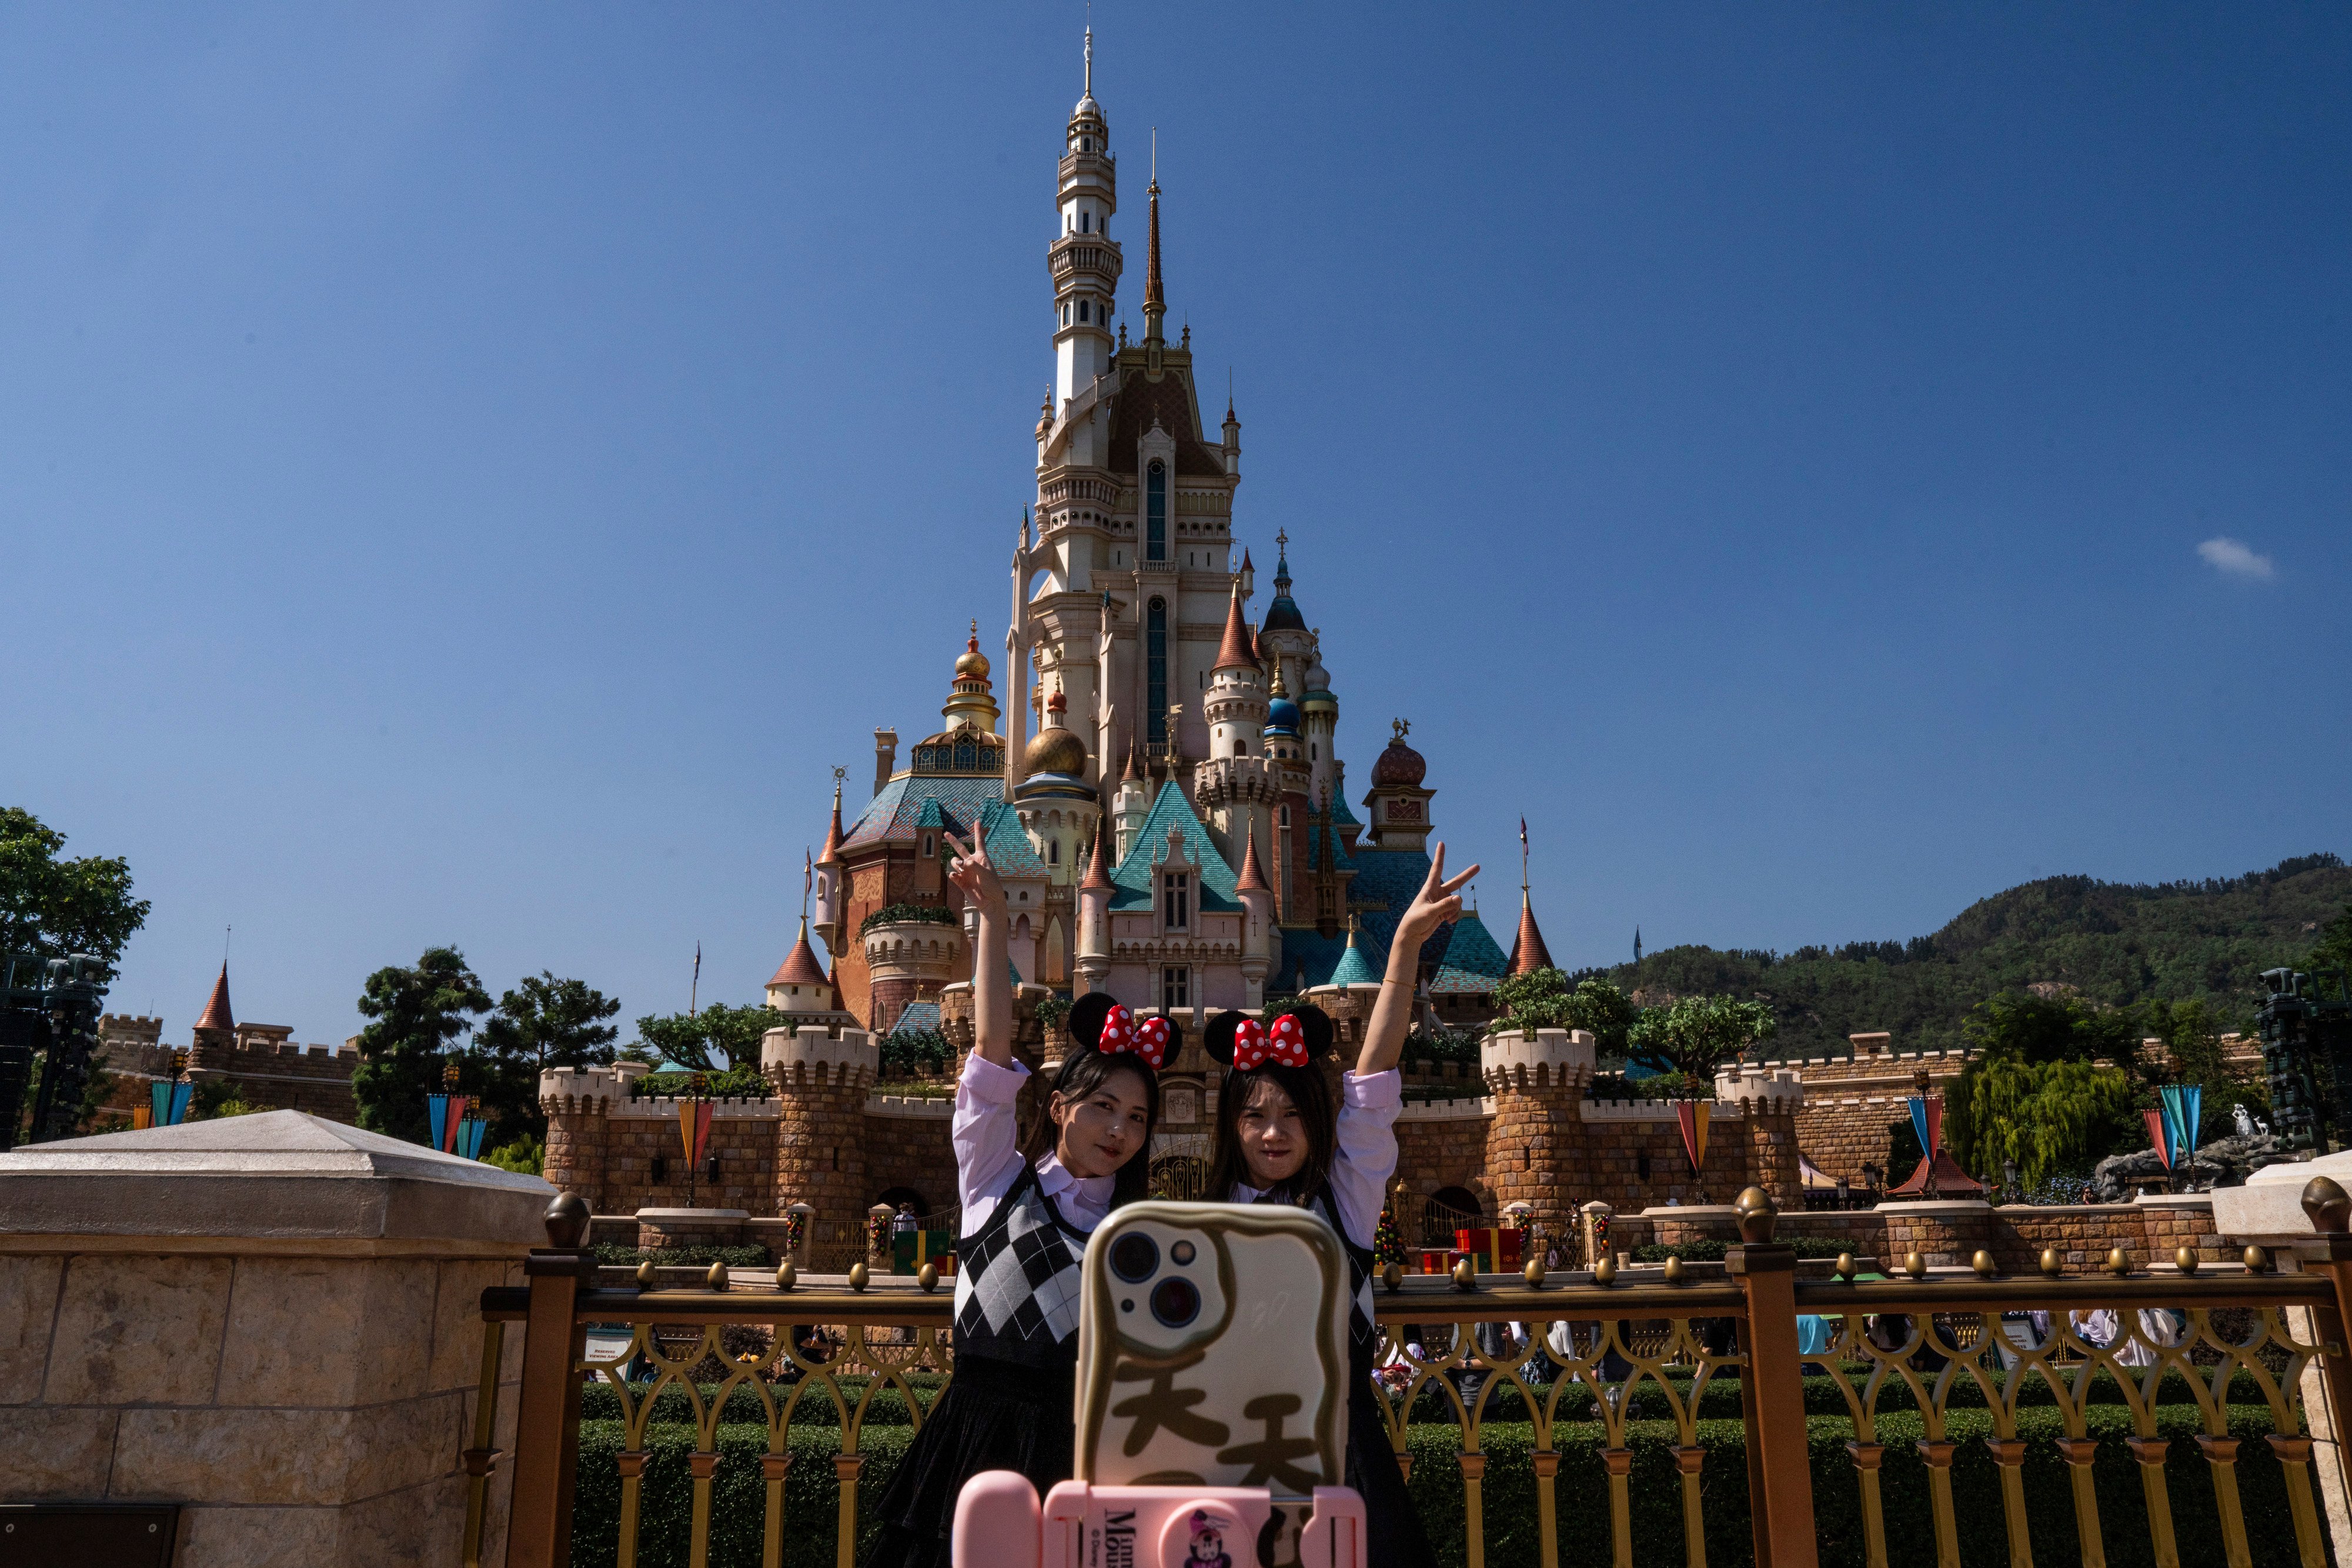 Visitors pose for photographs in front of the Castle of Magical Dreams at Hong Kong Disneyland on November 20. Hong Kong Disneyland is the smallest Disney resort campus in the world. Photo: AP